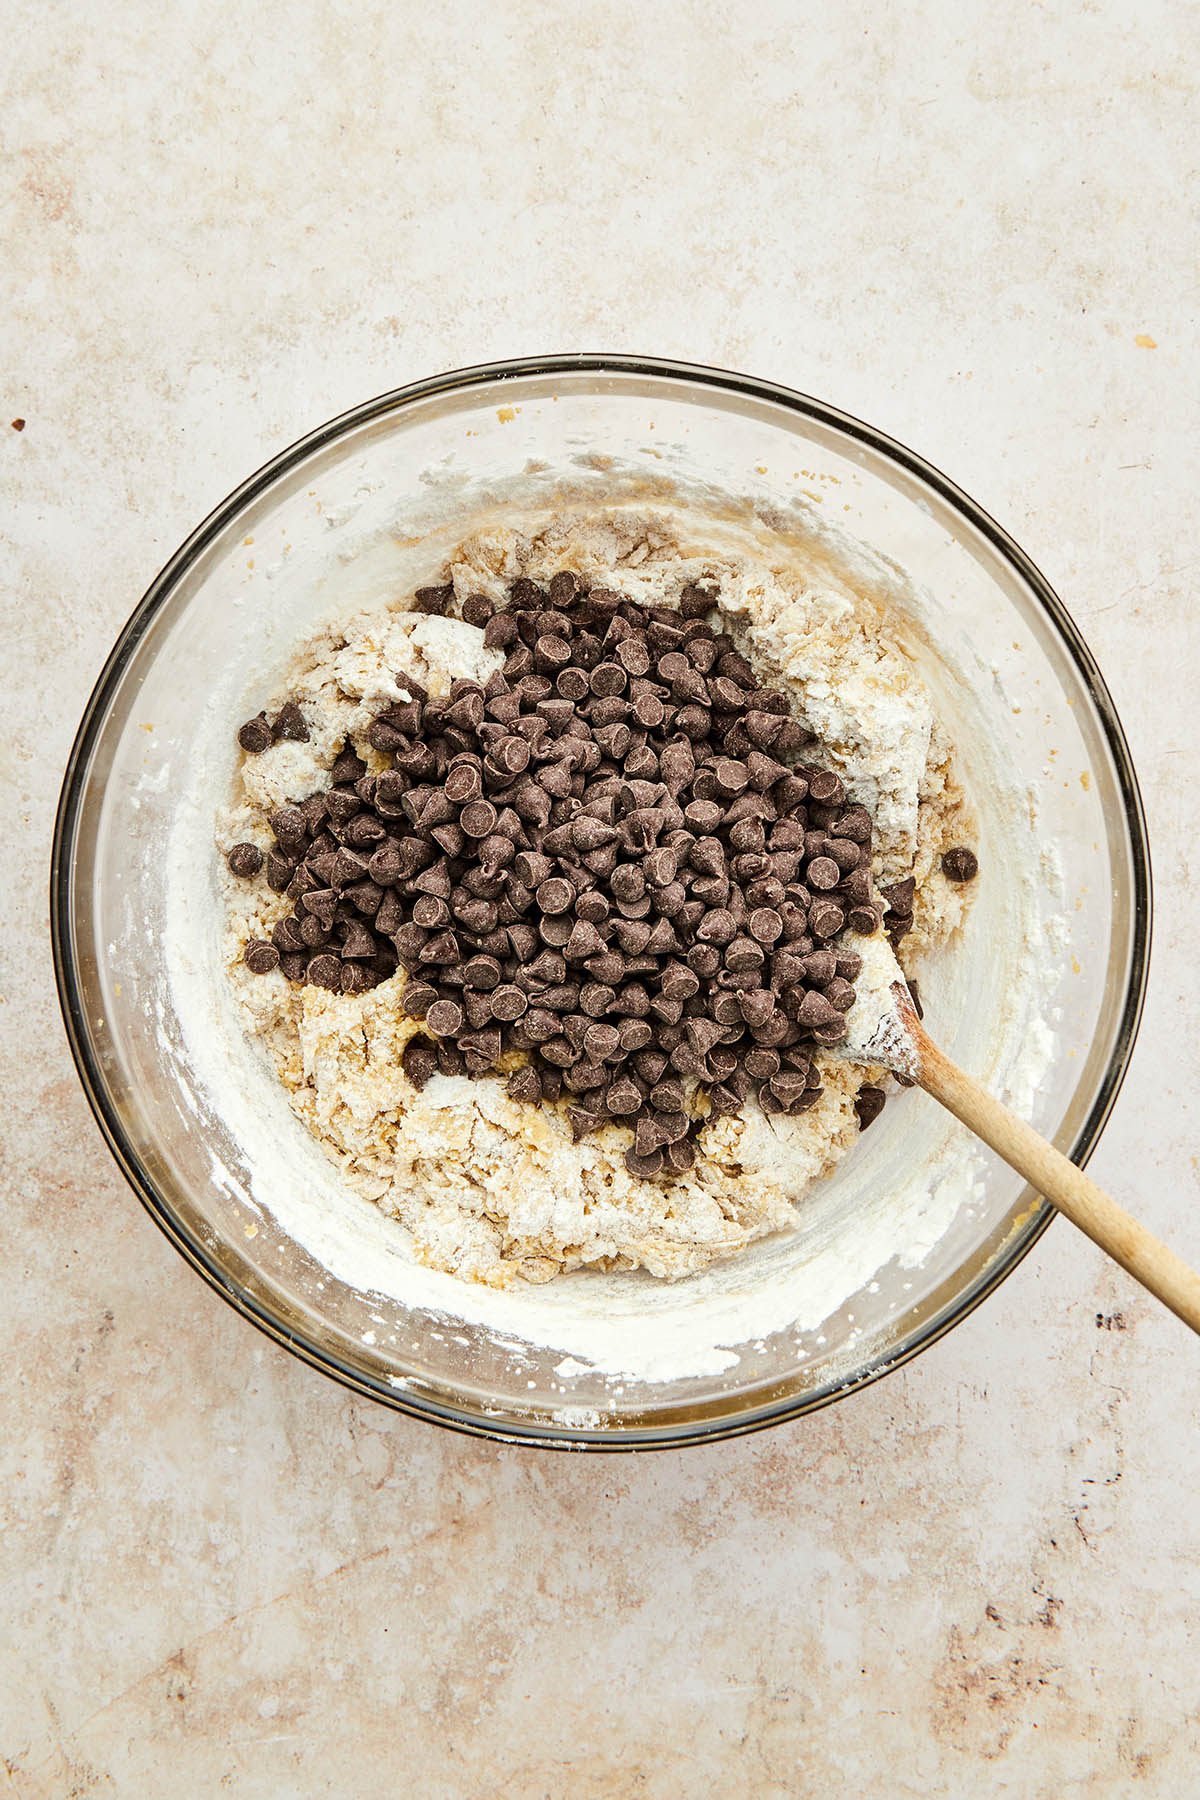 Half mixed cookie dough in a glass mixing bowl with chocolate chips and a wooden spoon on top.